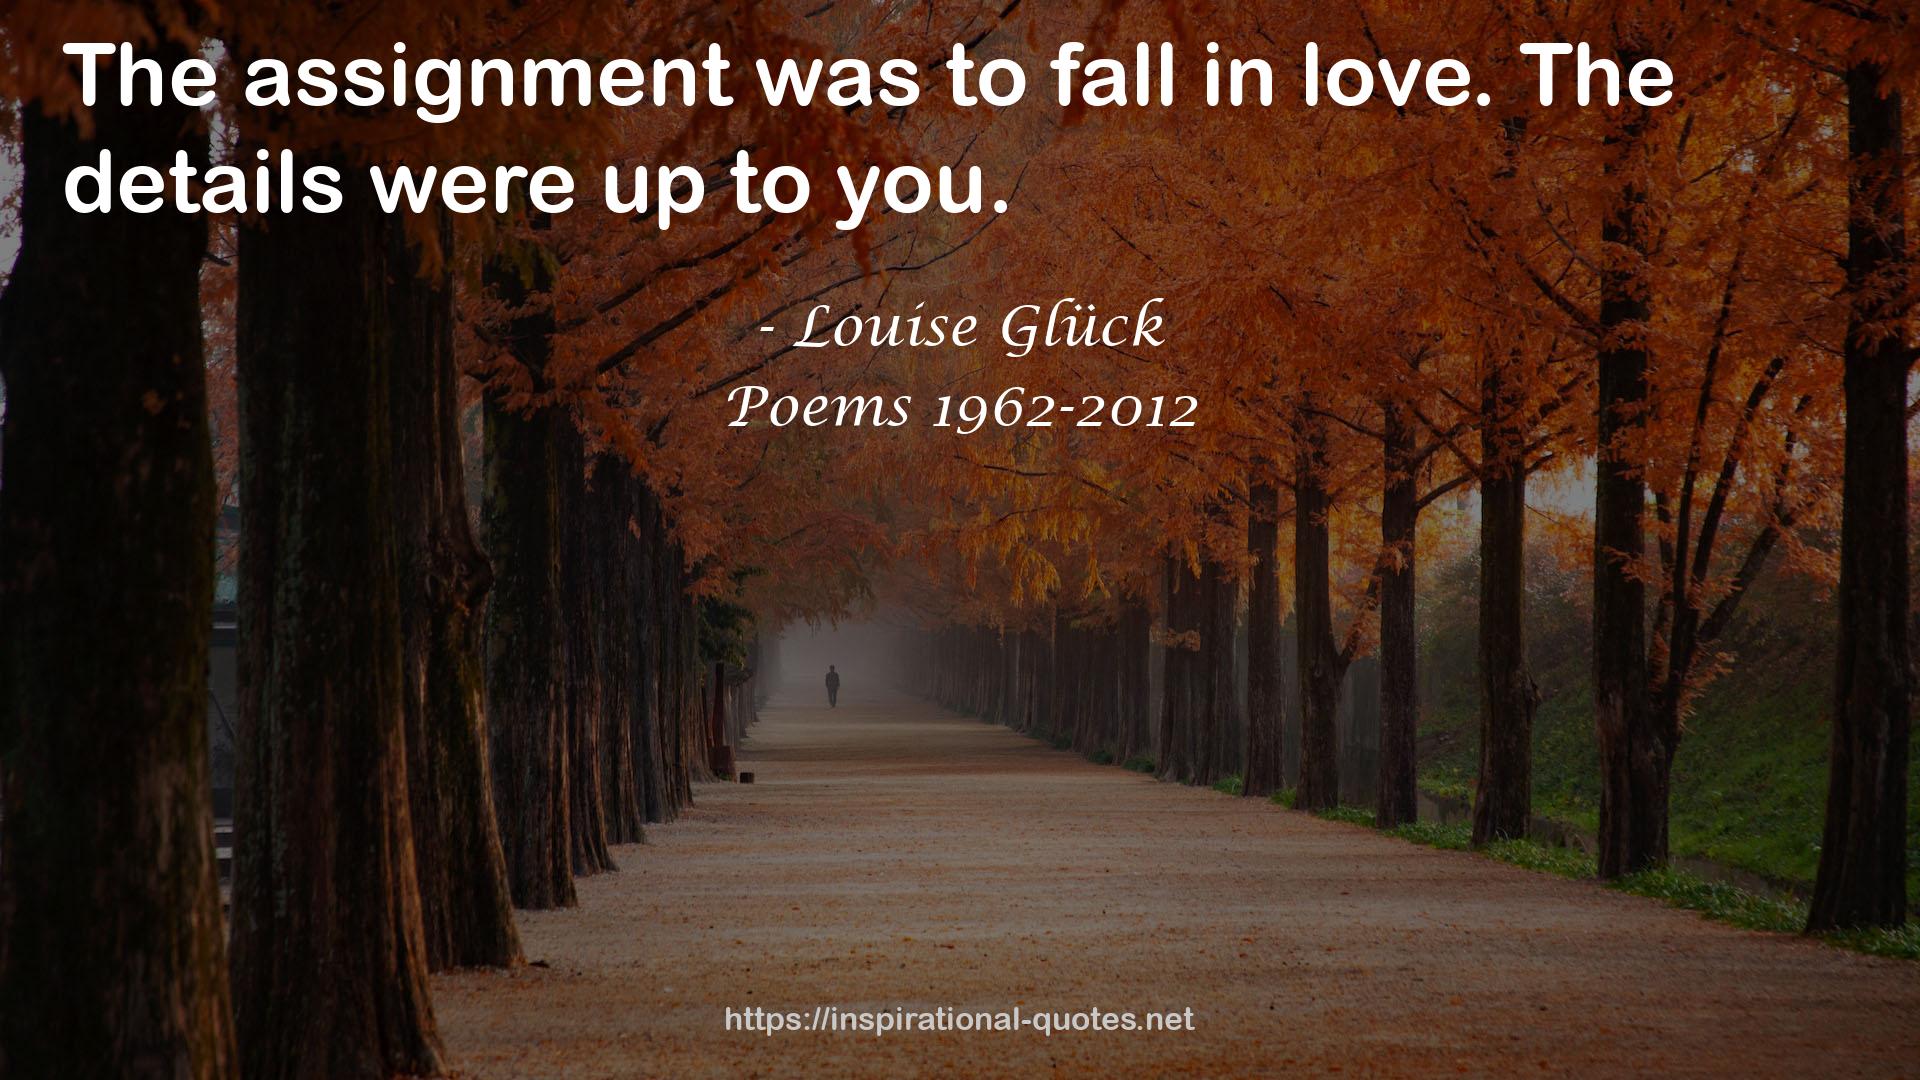 Poems 1962-2012 QUOTES